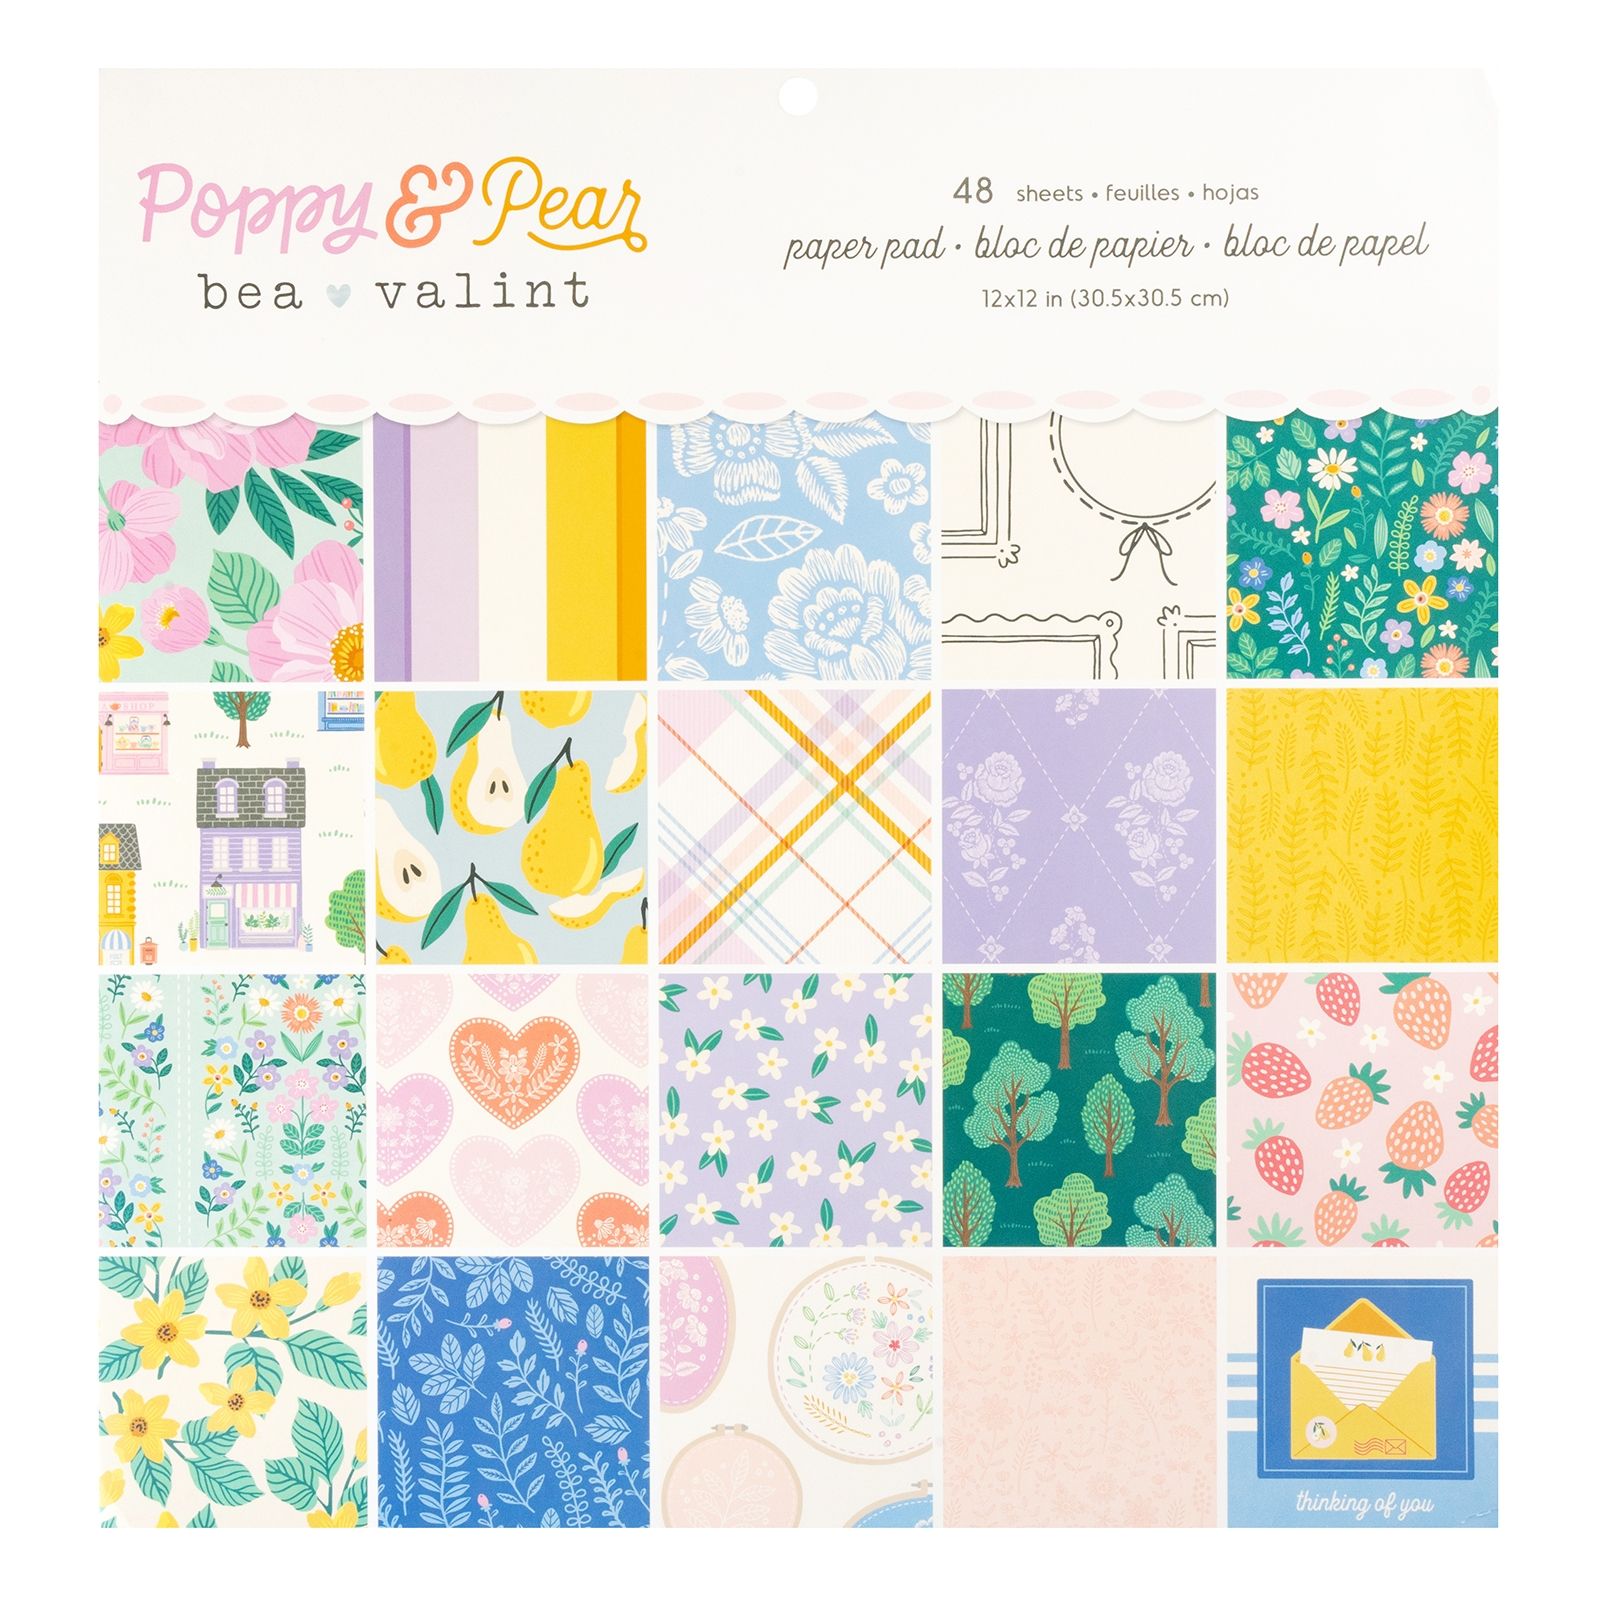 American Crafts • Paper pad Bea Valint Poppy and Pear